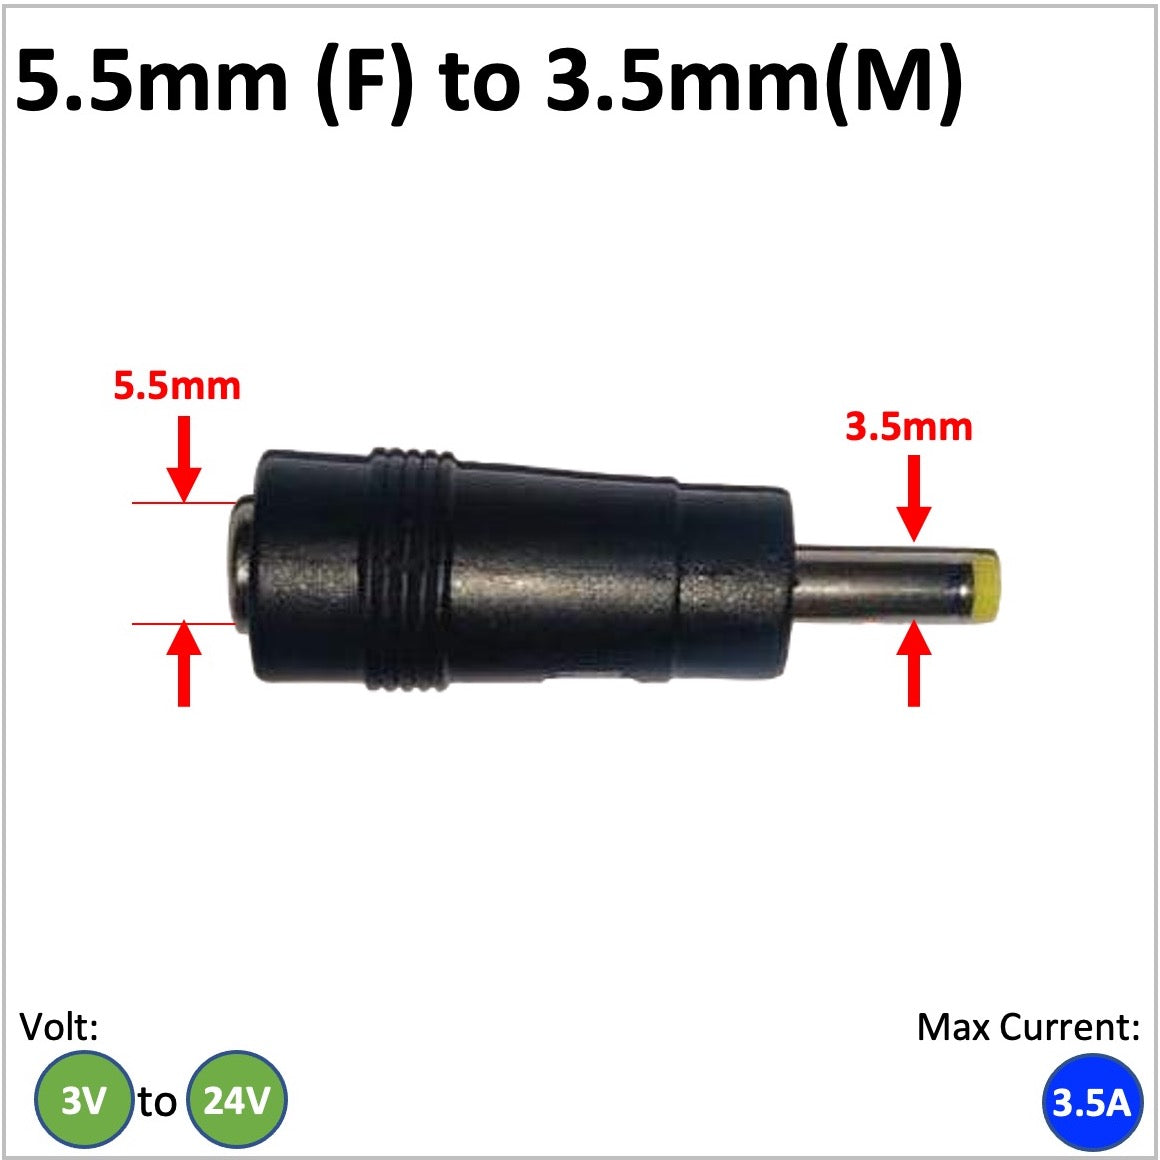 DC barrell converter cable with a 3.5mm female connector leading to 5.5mm male DC barrel adapter